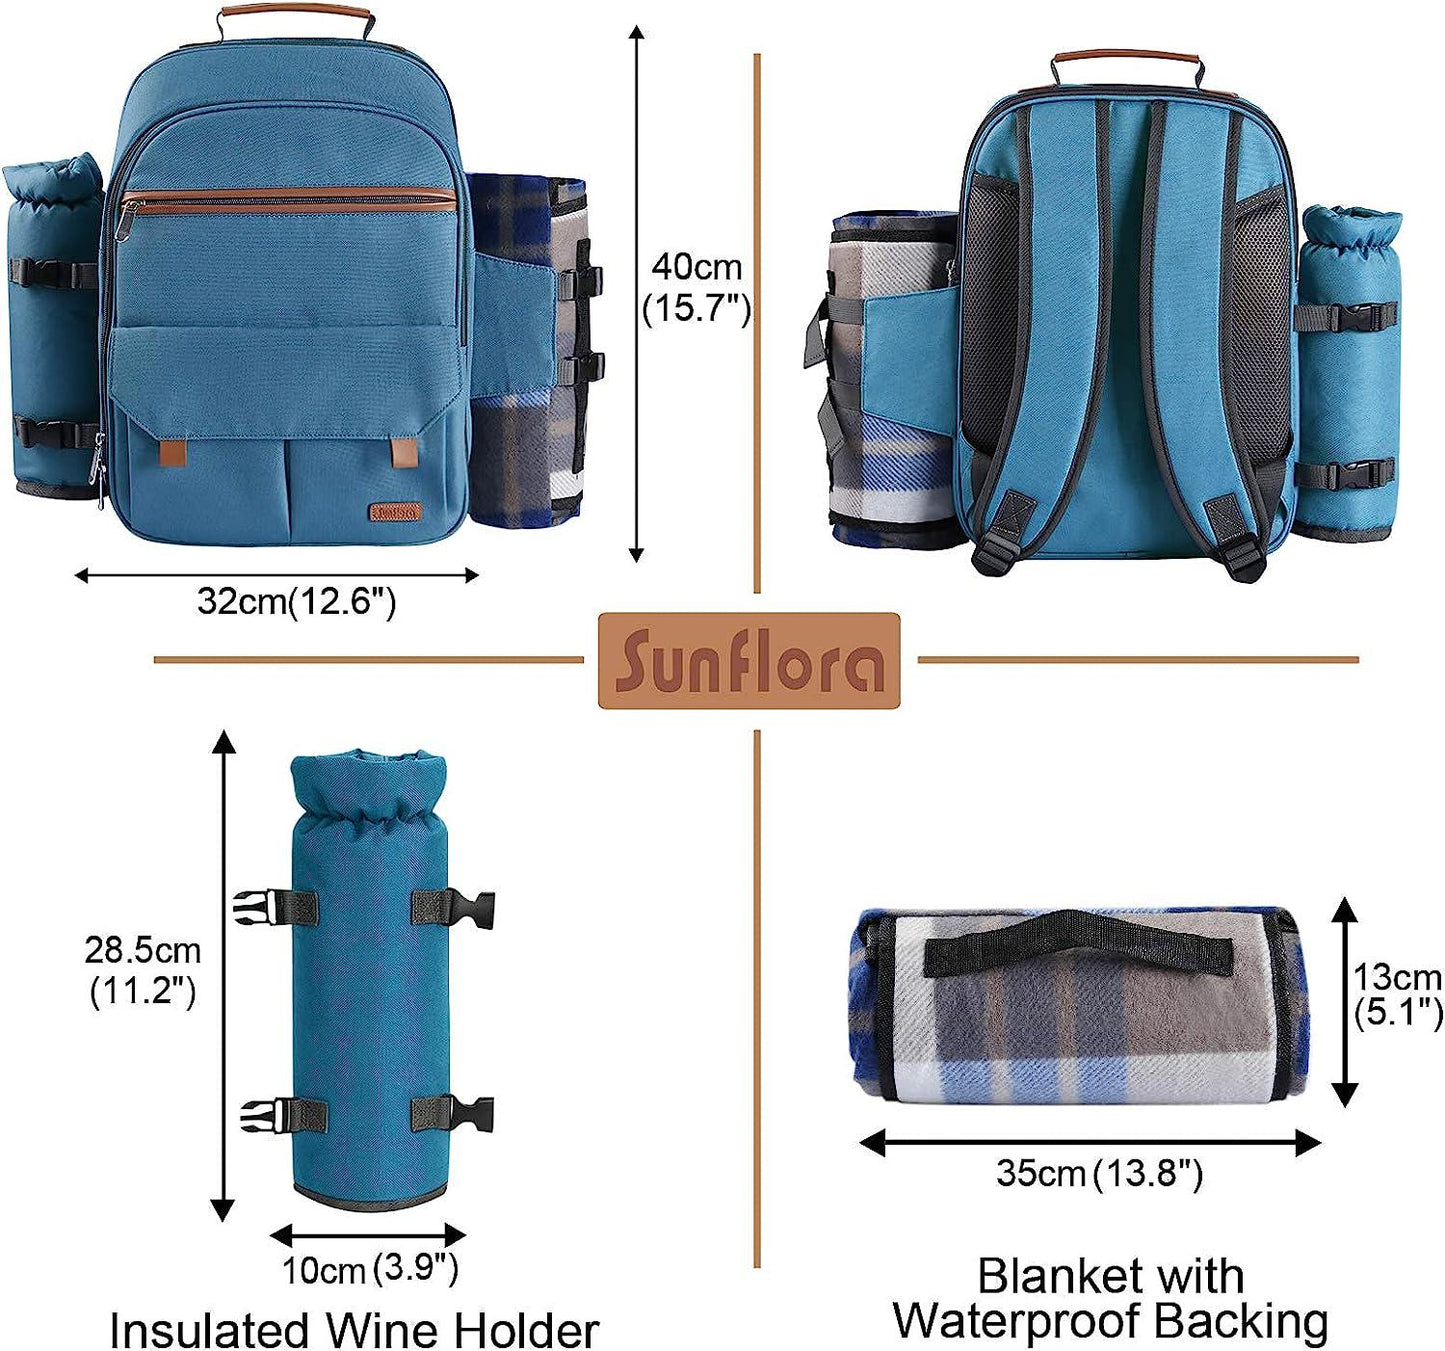 Picnic Backpack for 4 Person with Blanket Picnic Basket Set for 2 with Insulated Cooler Wine Pouch for Family Couples